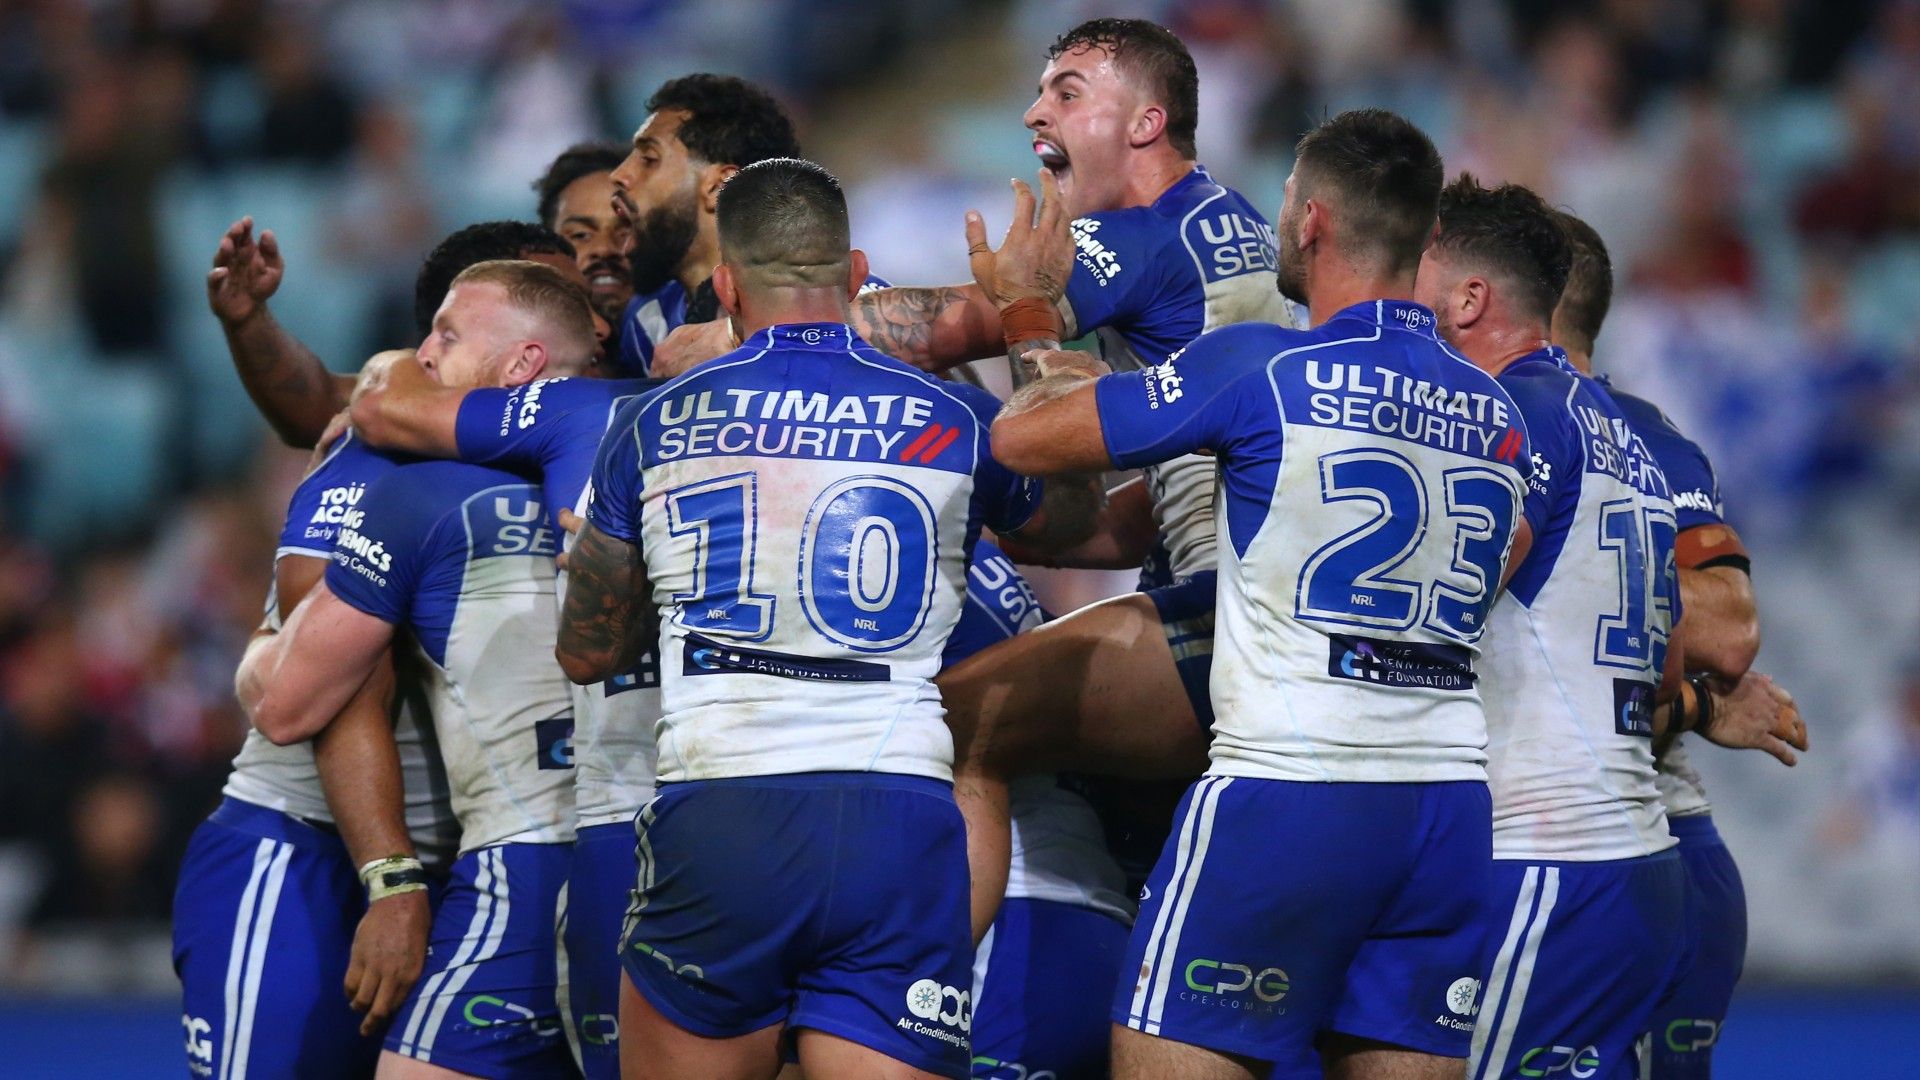 Bulldogs spring massive upset, hold off fast finishing Roosters